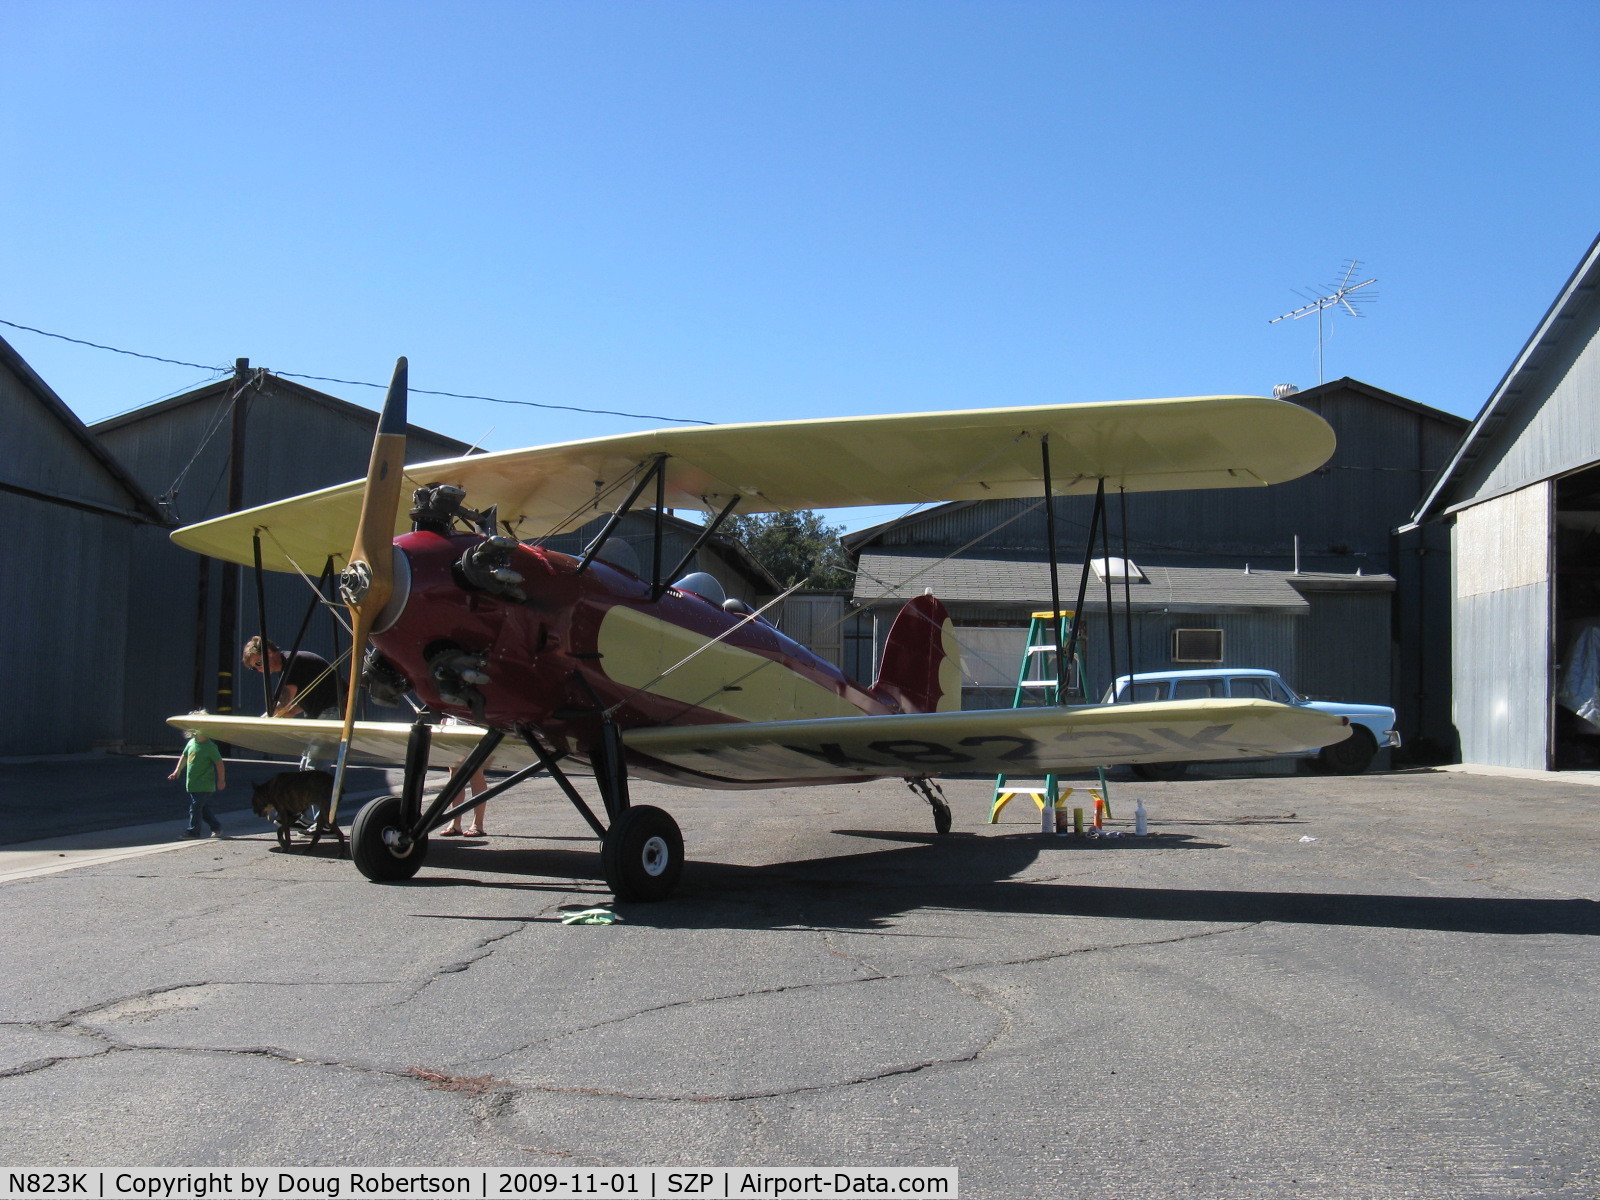 N823K, 1993 Great Lakes 2T-1A Sport Trainer C/N 1020, 1993 Ball GREAT LAKES 2T-1AK as NX823K, Kinner R 56 five cylinder radial, 160 Hp modified for fuel injection